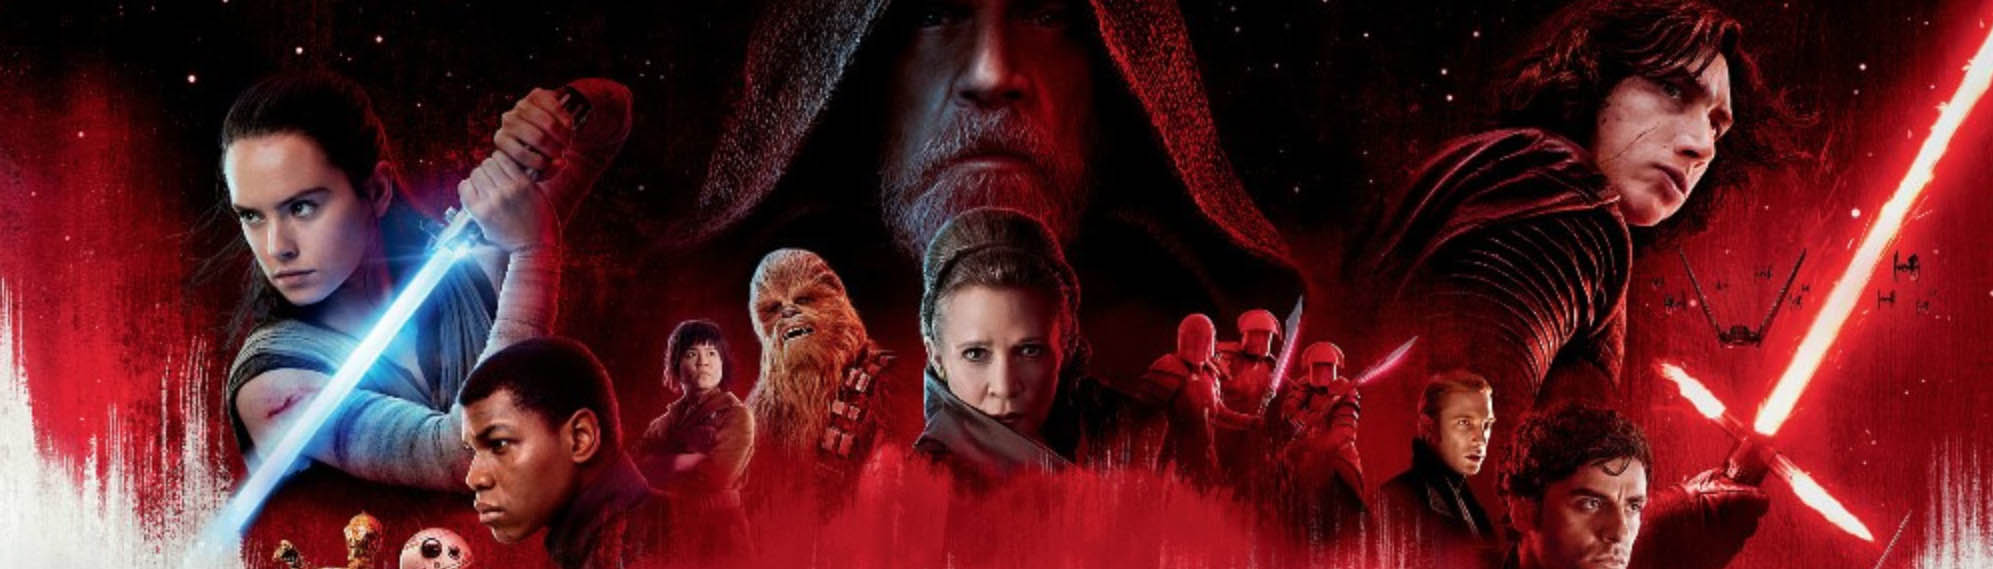 My slightly altered thoughts on ‘Star Wars: The Last Jedi’ after a second viewing